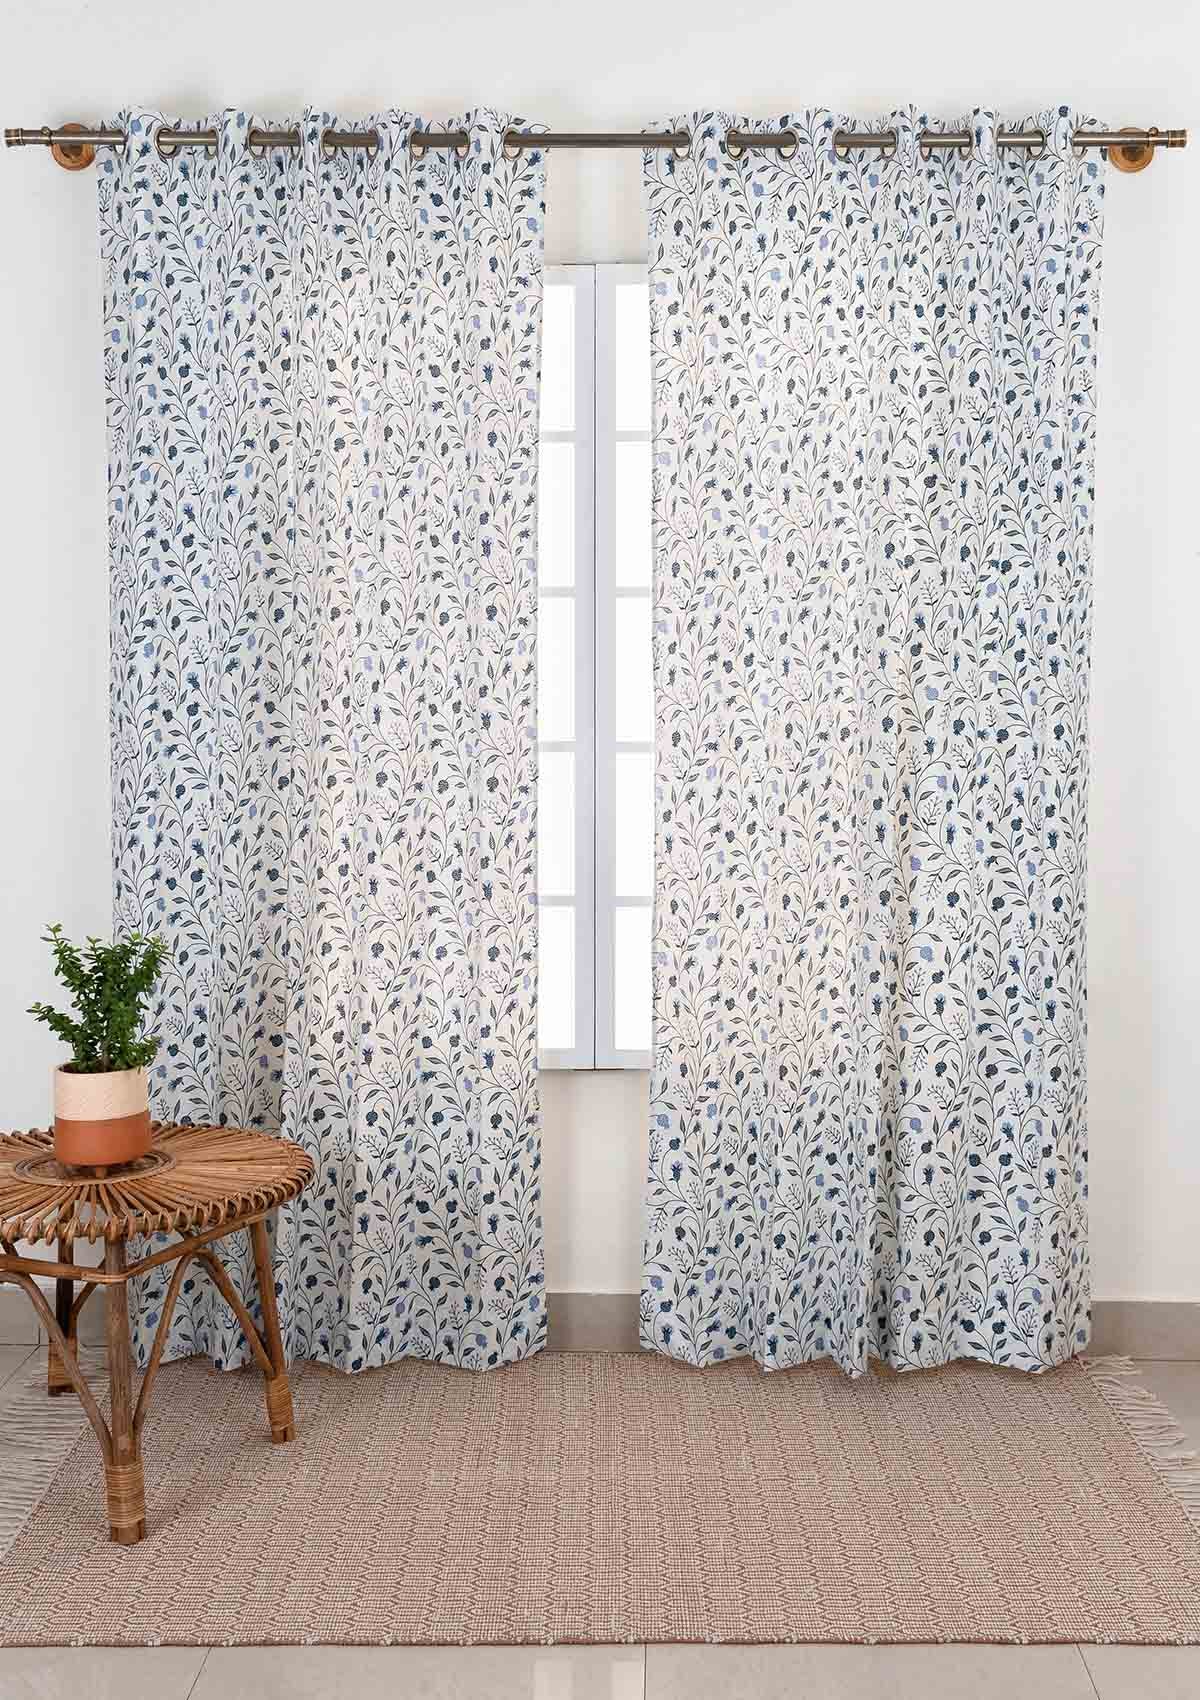 Blue Ruby 100% cotton floral curtain for living room - Room darkening - Indigo - Pack of 1